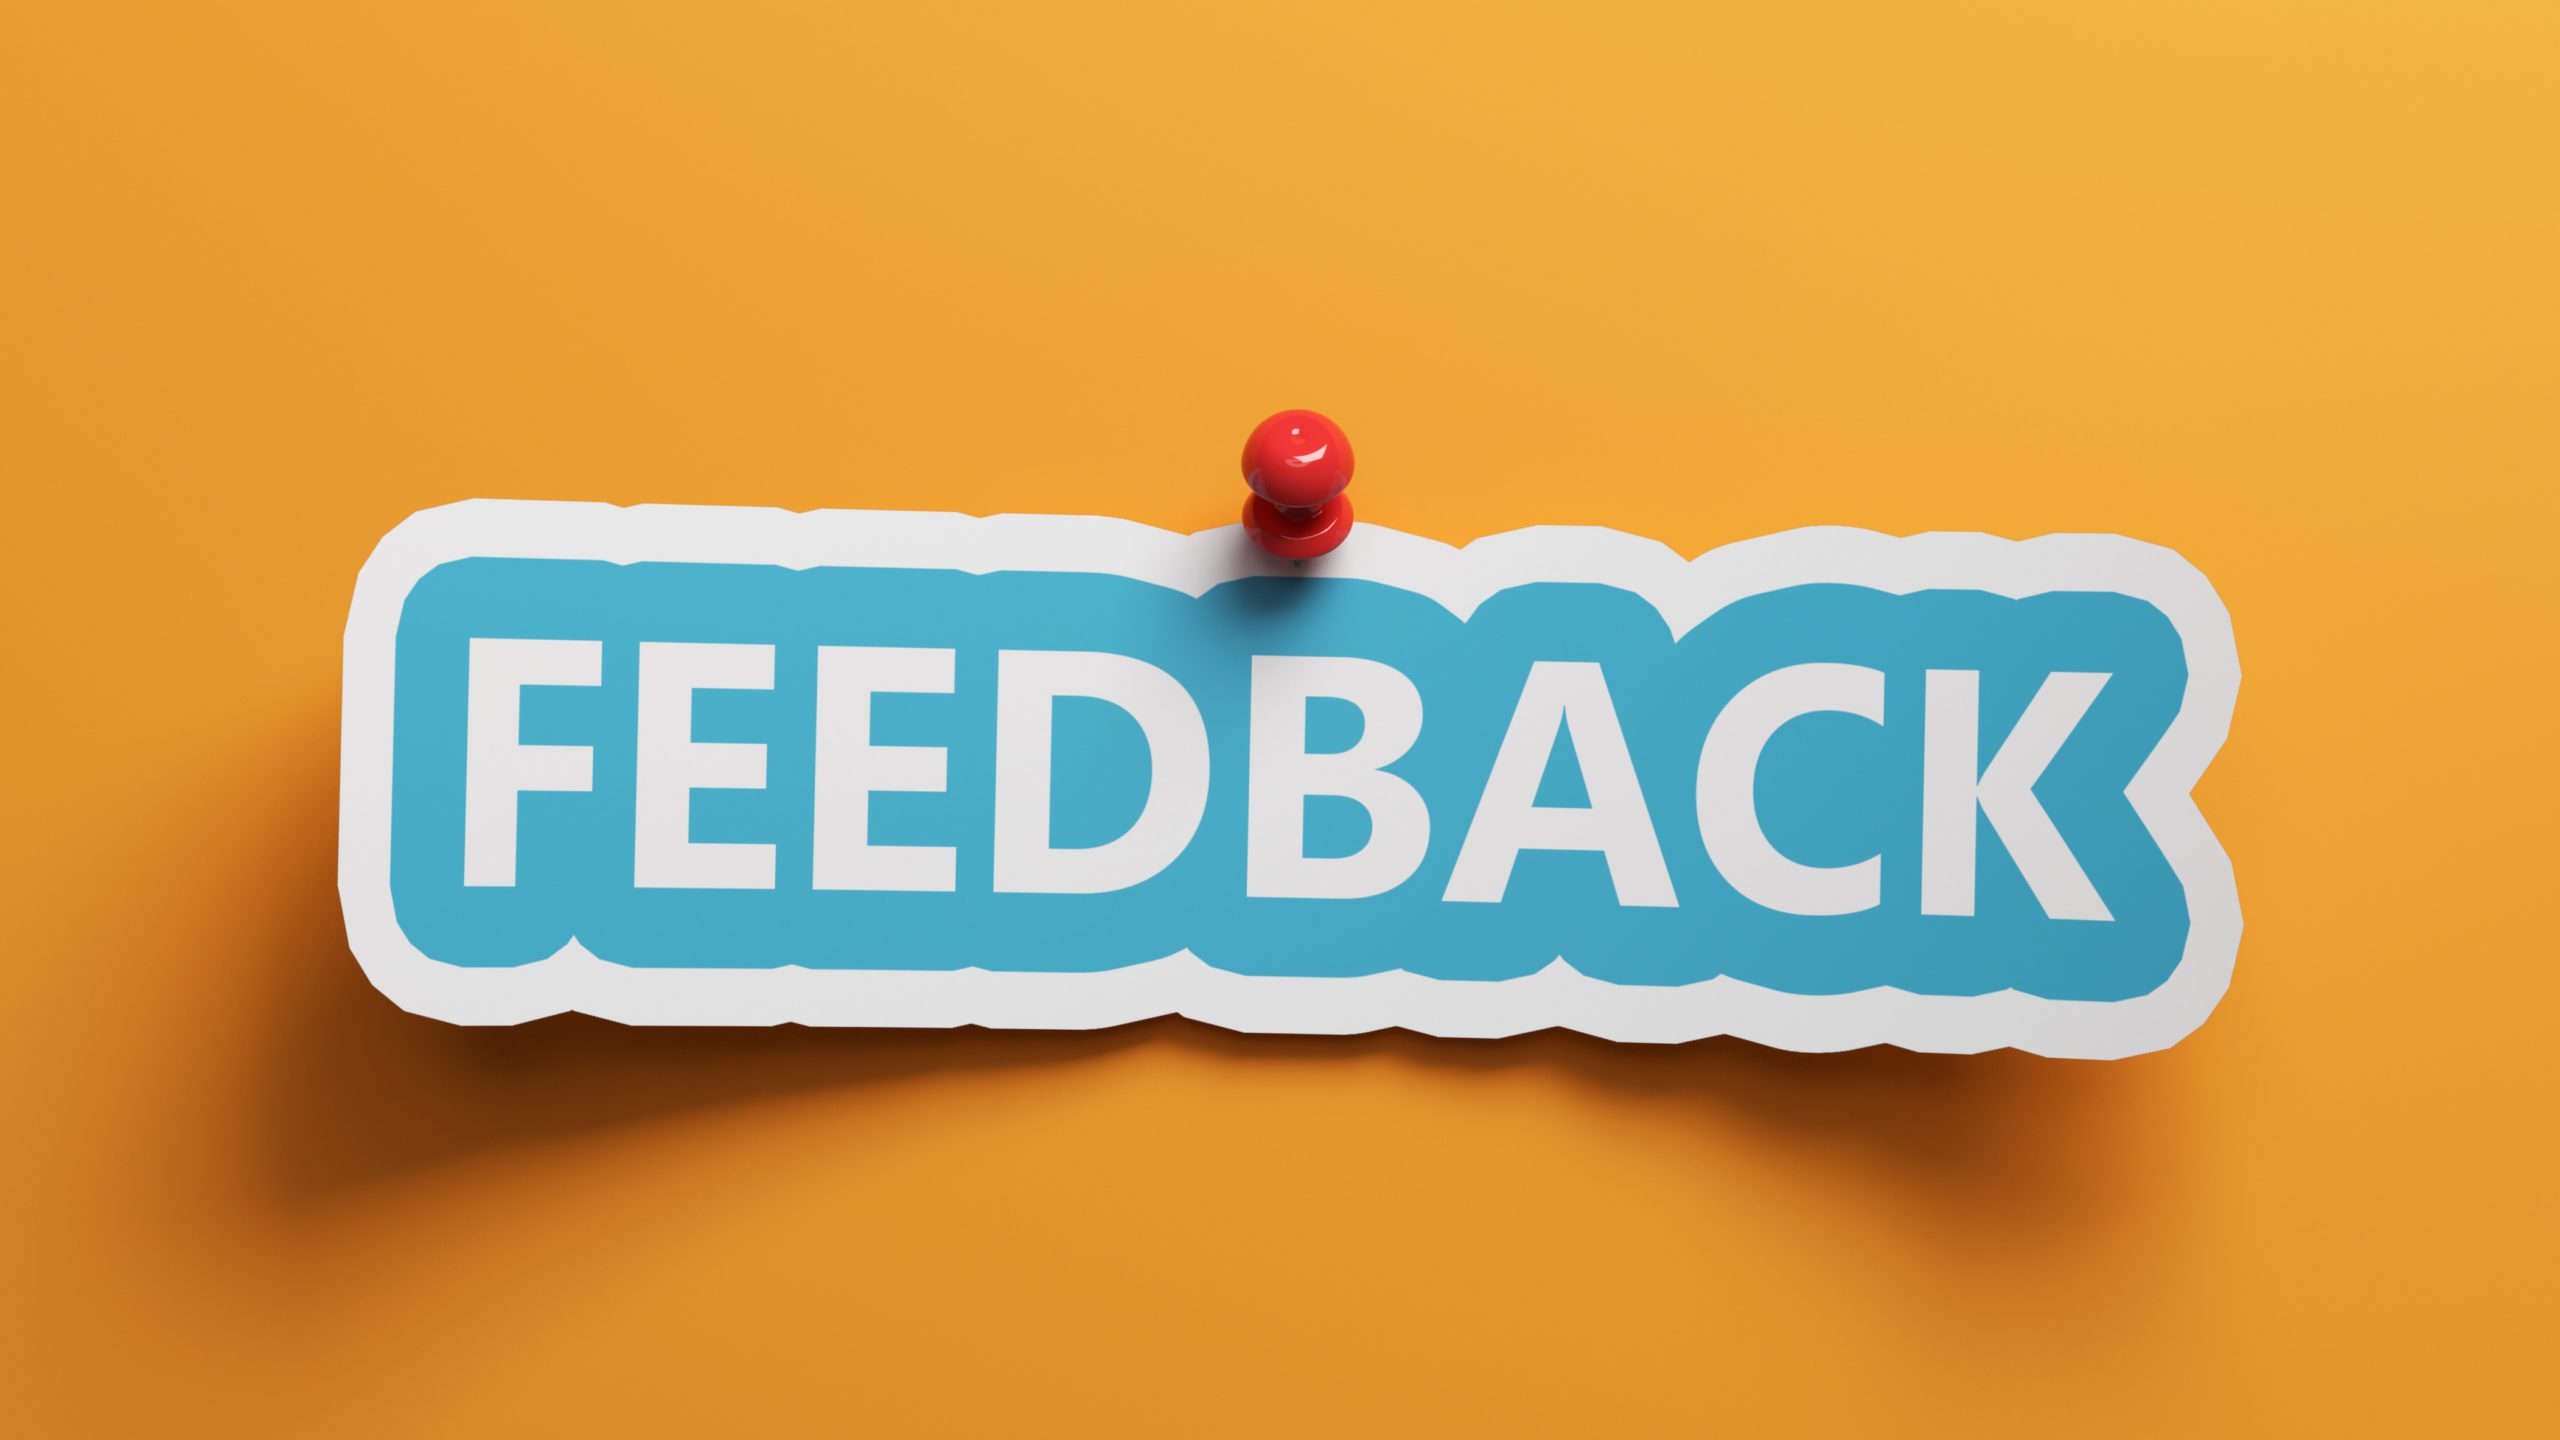 Without effective feedback, projects can get bogged down as people try to figure out what certain comments actually mean.